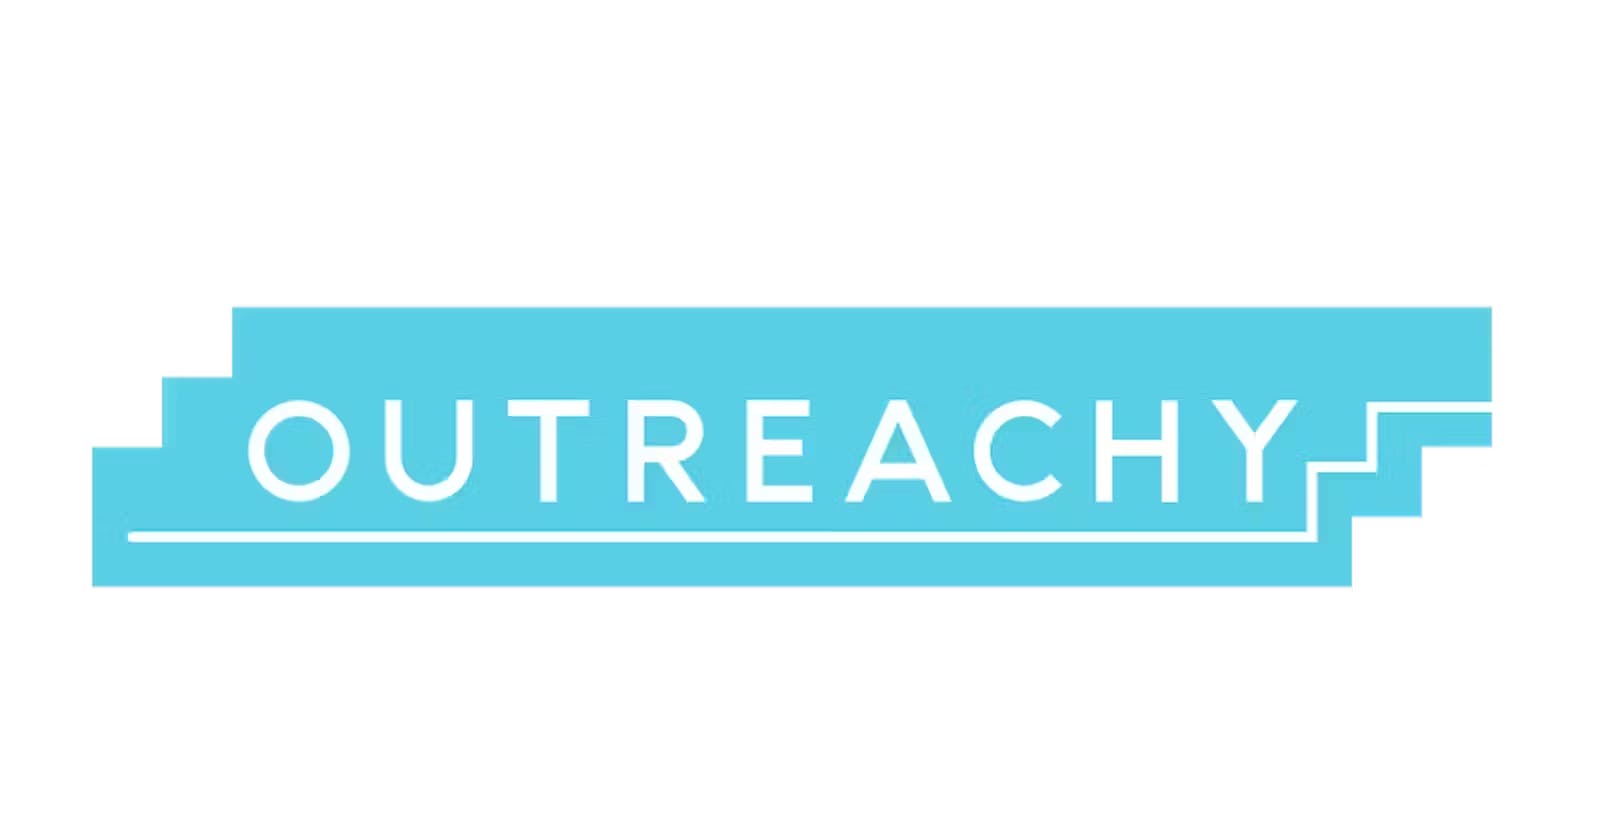 Outreachy Blog-Post #1: Introduction Post.